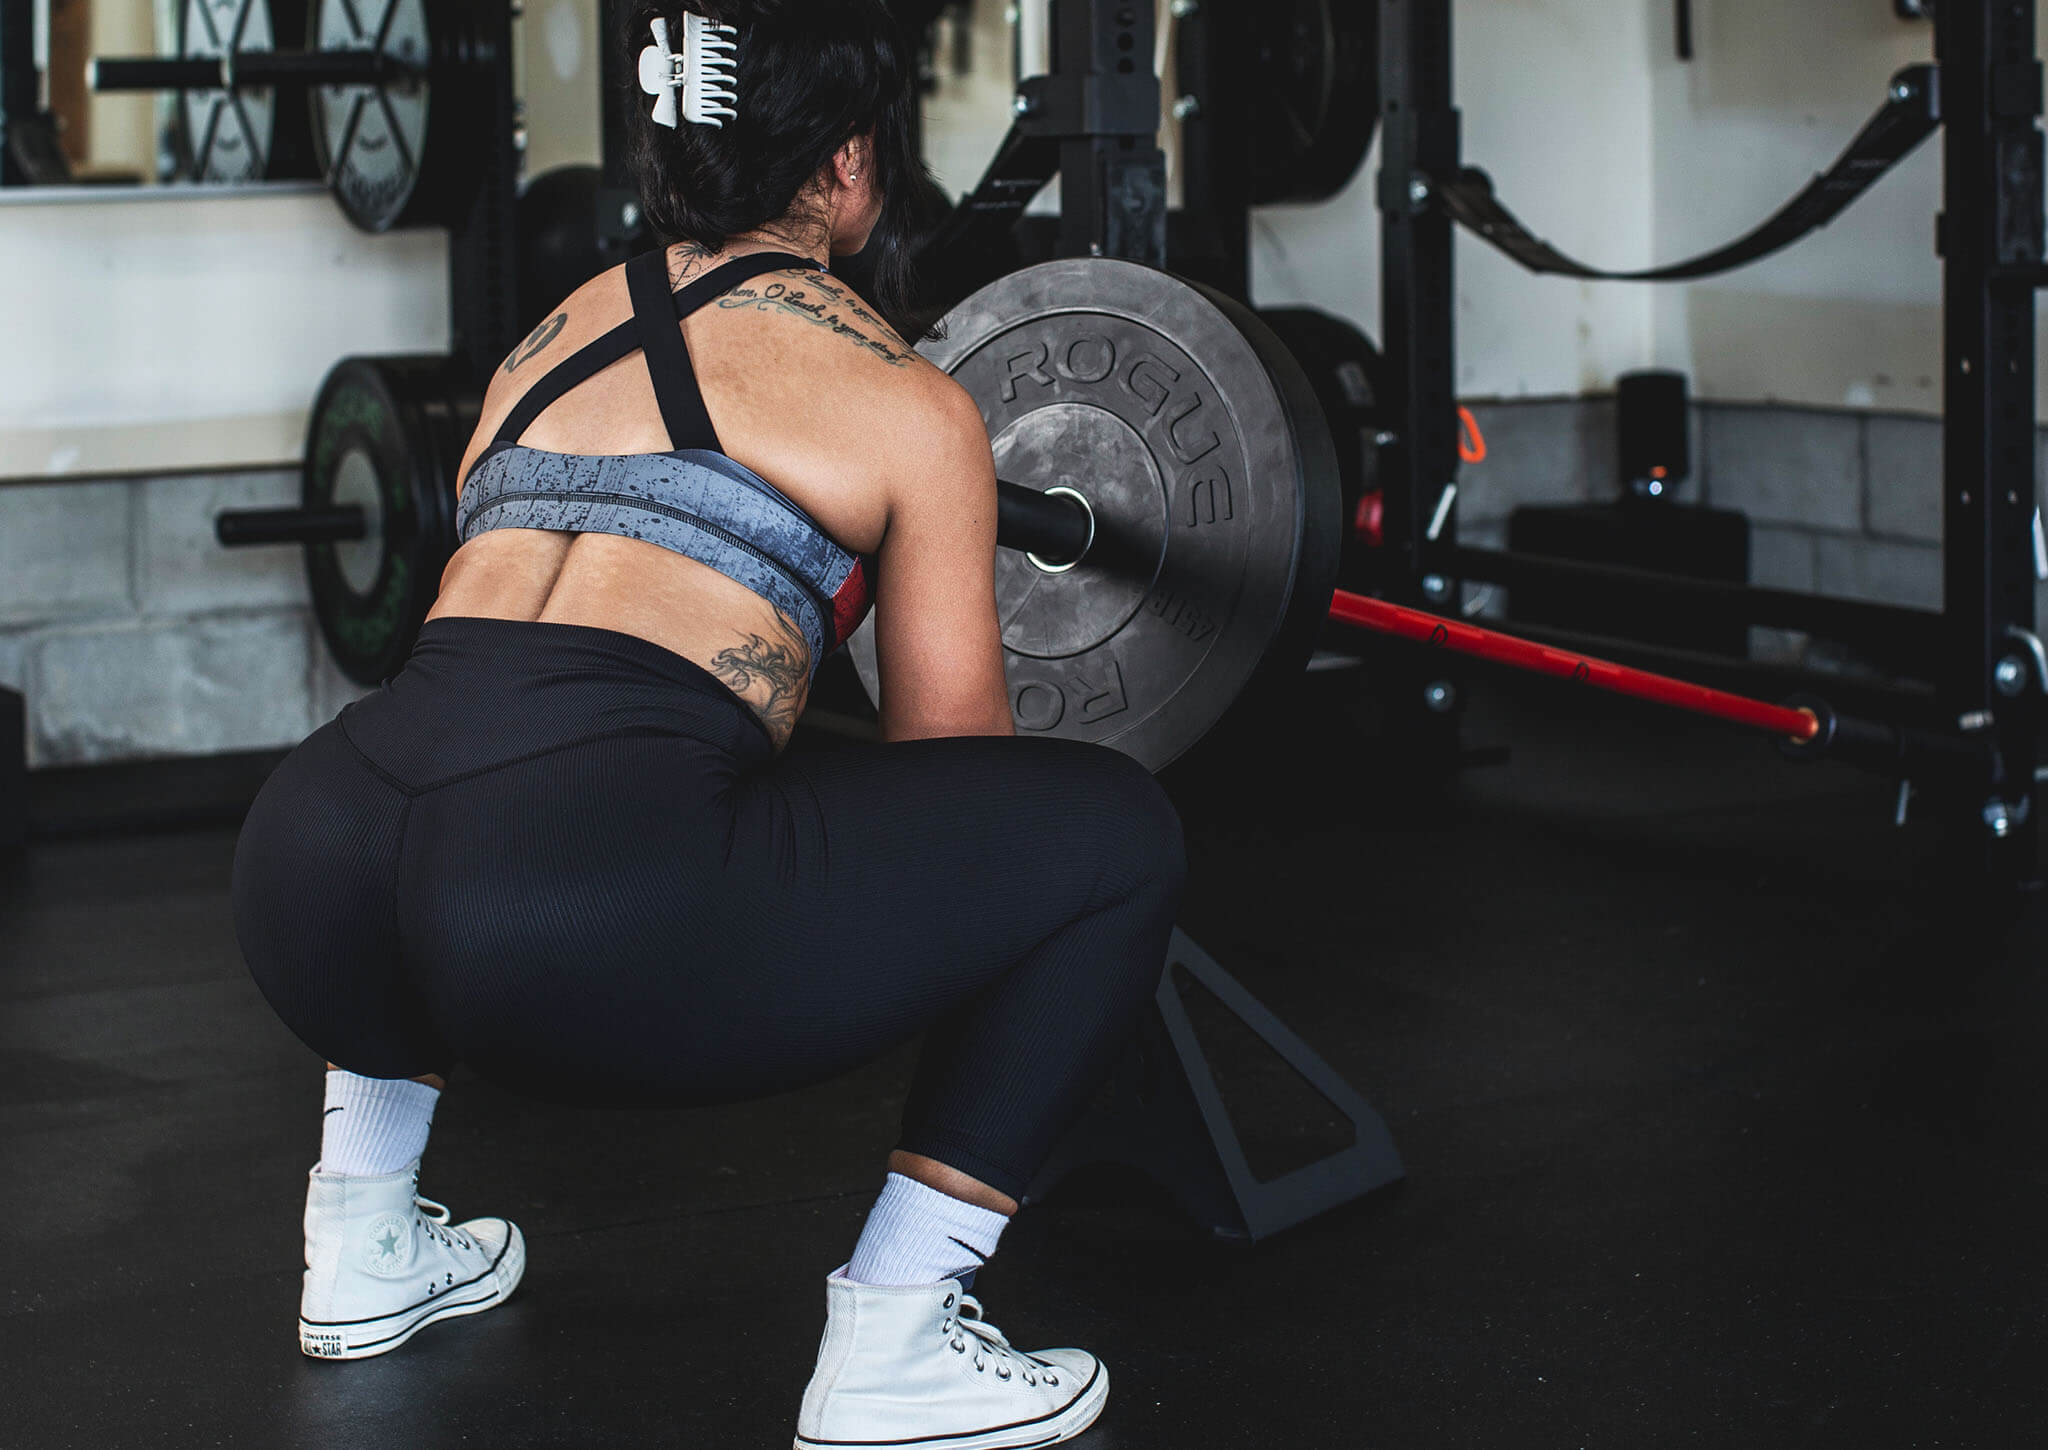 Woman performing deep landmine squat with a landmine jack underneath the barbell and weights in a home garage gym - The Landmine Jack by Exponent Edge